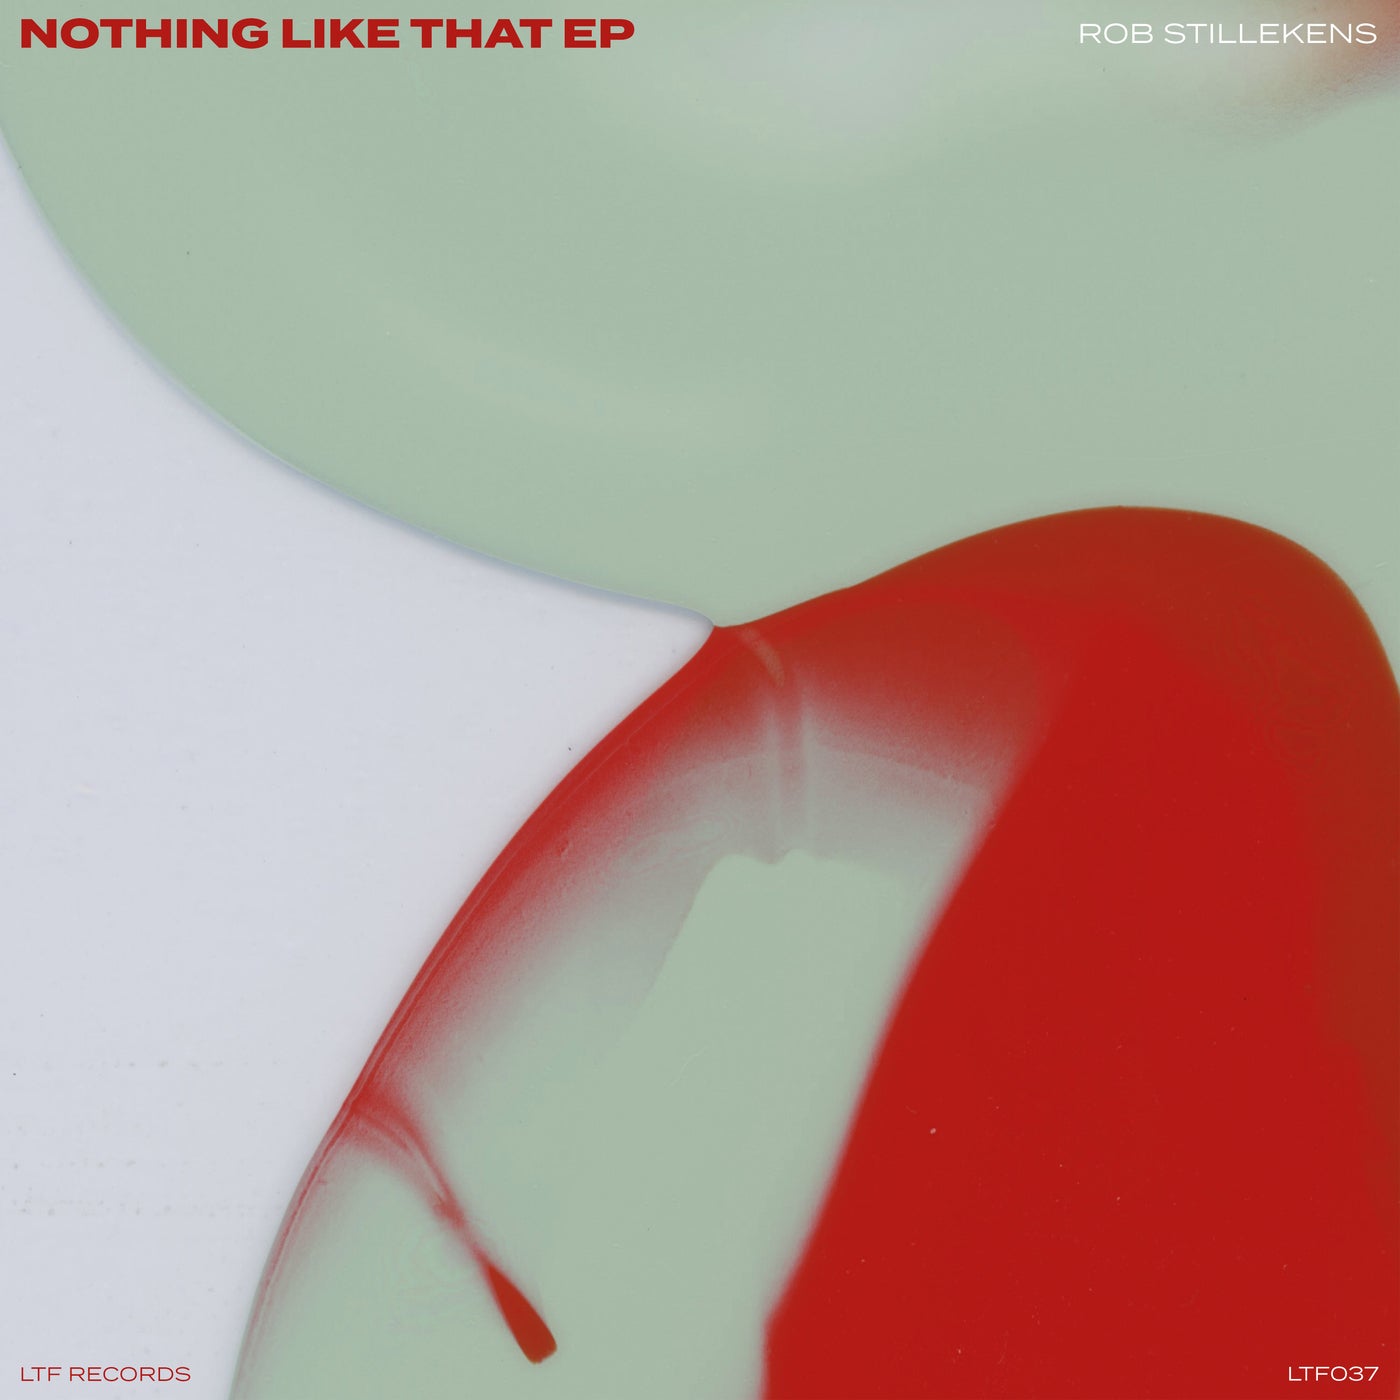 image cover: Rob Stillekens - Nothing Like That EP on LTF Records